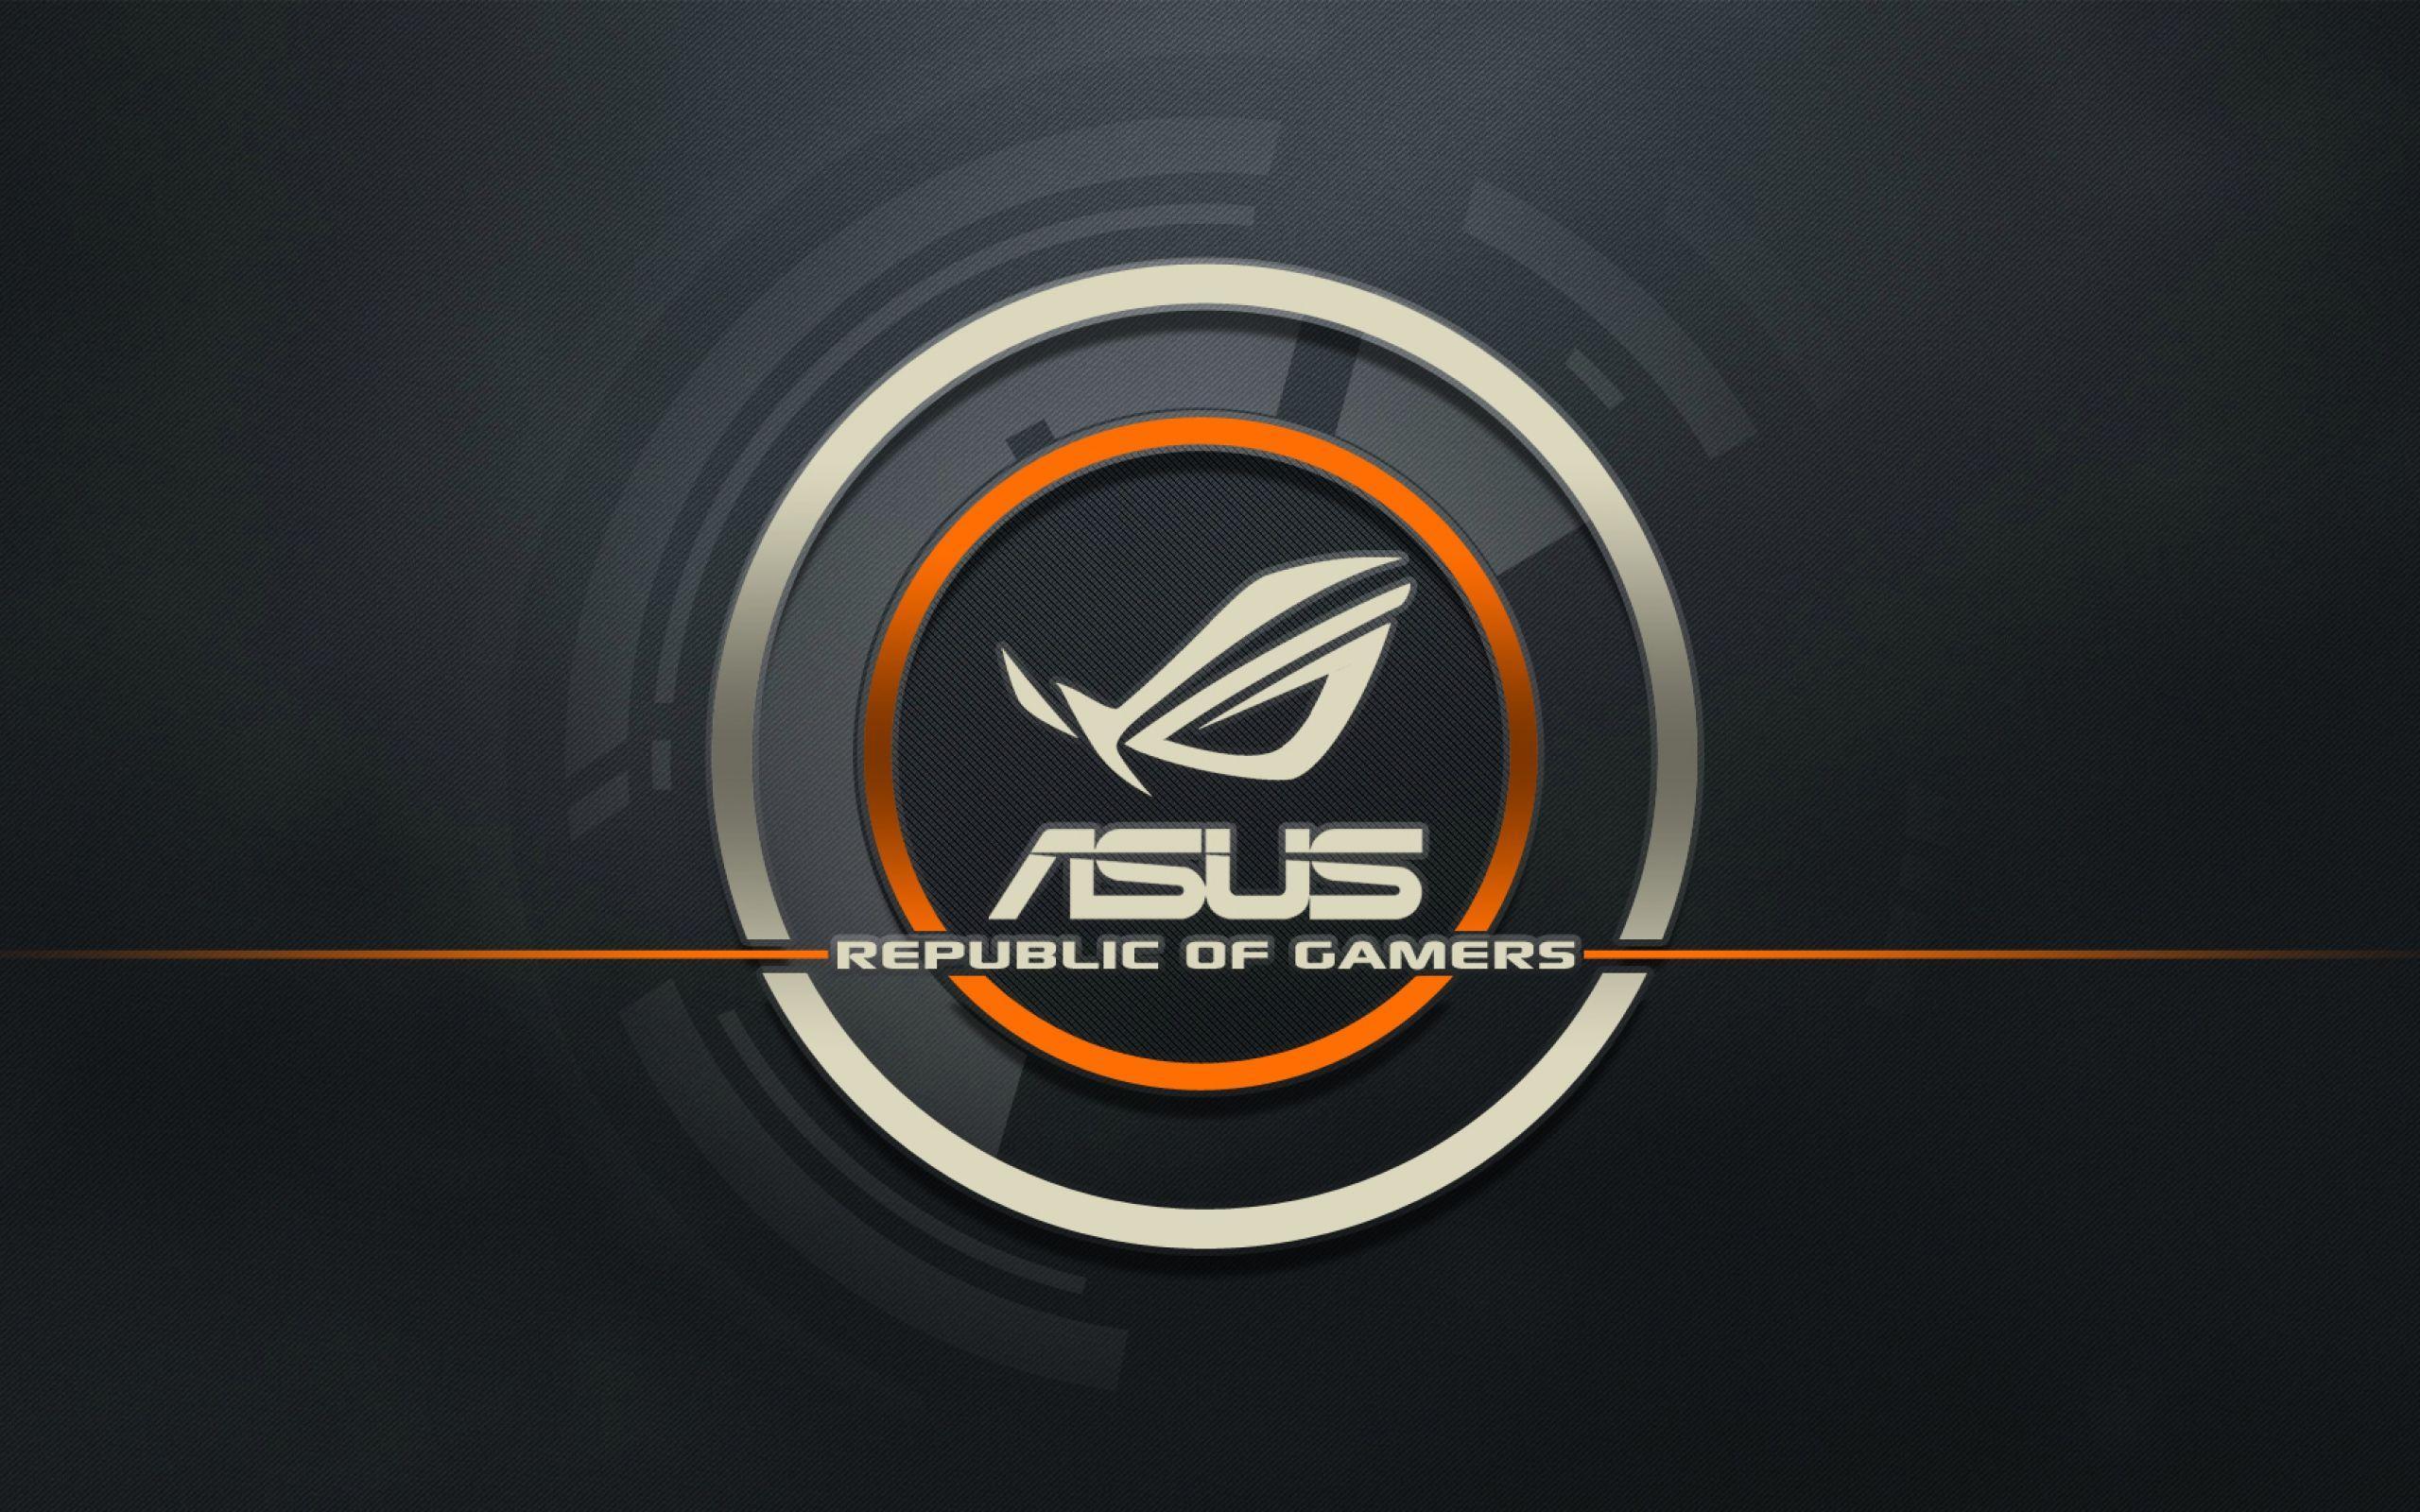 Asus HD Wallpaper and Background Image